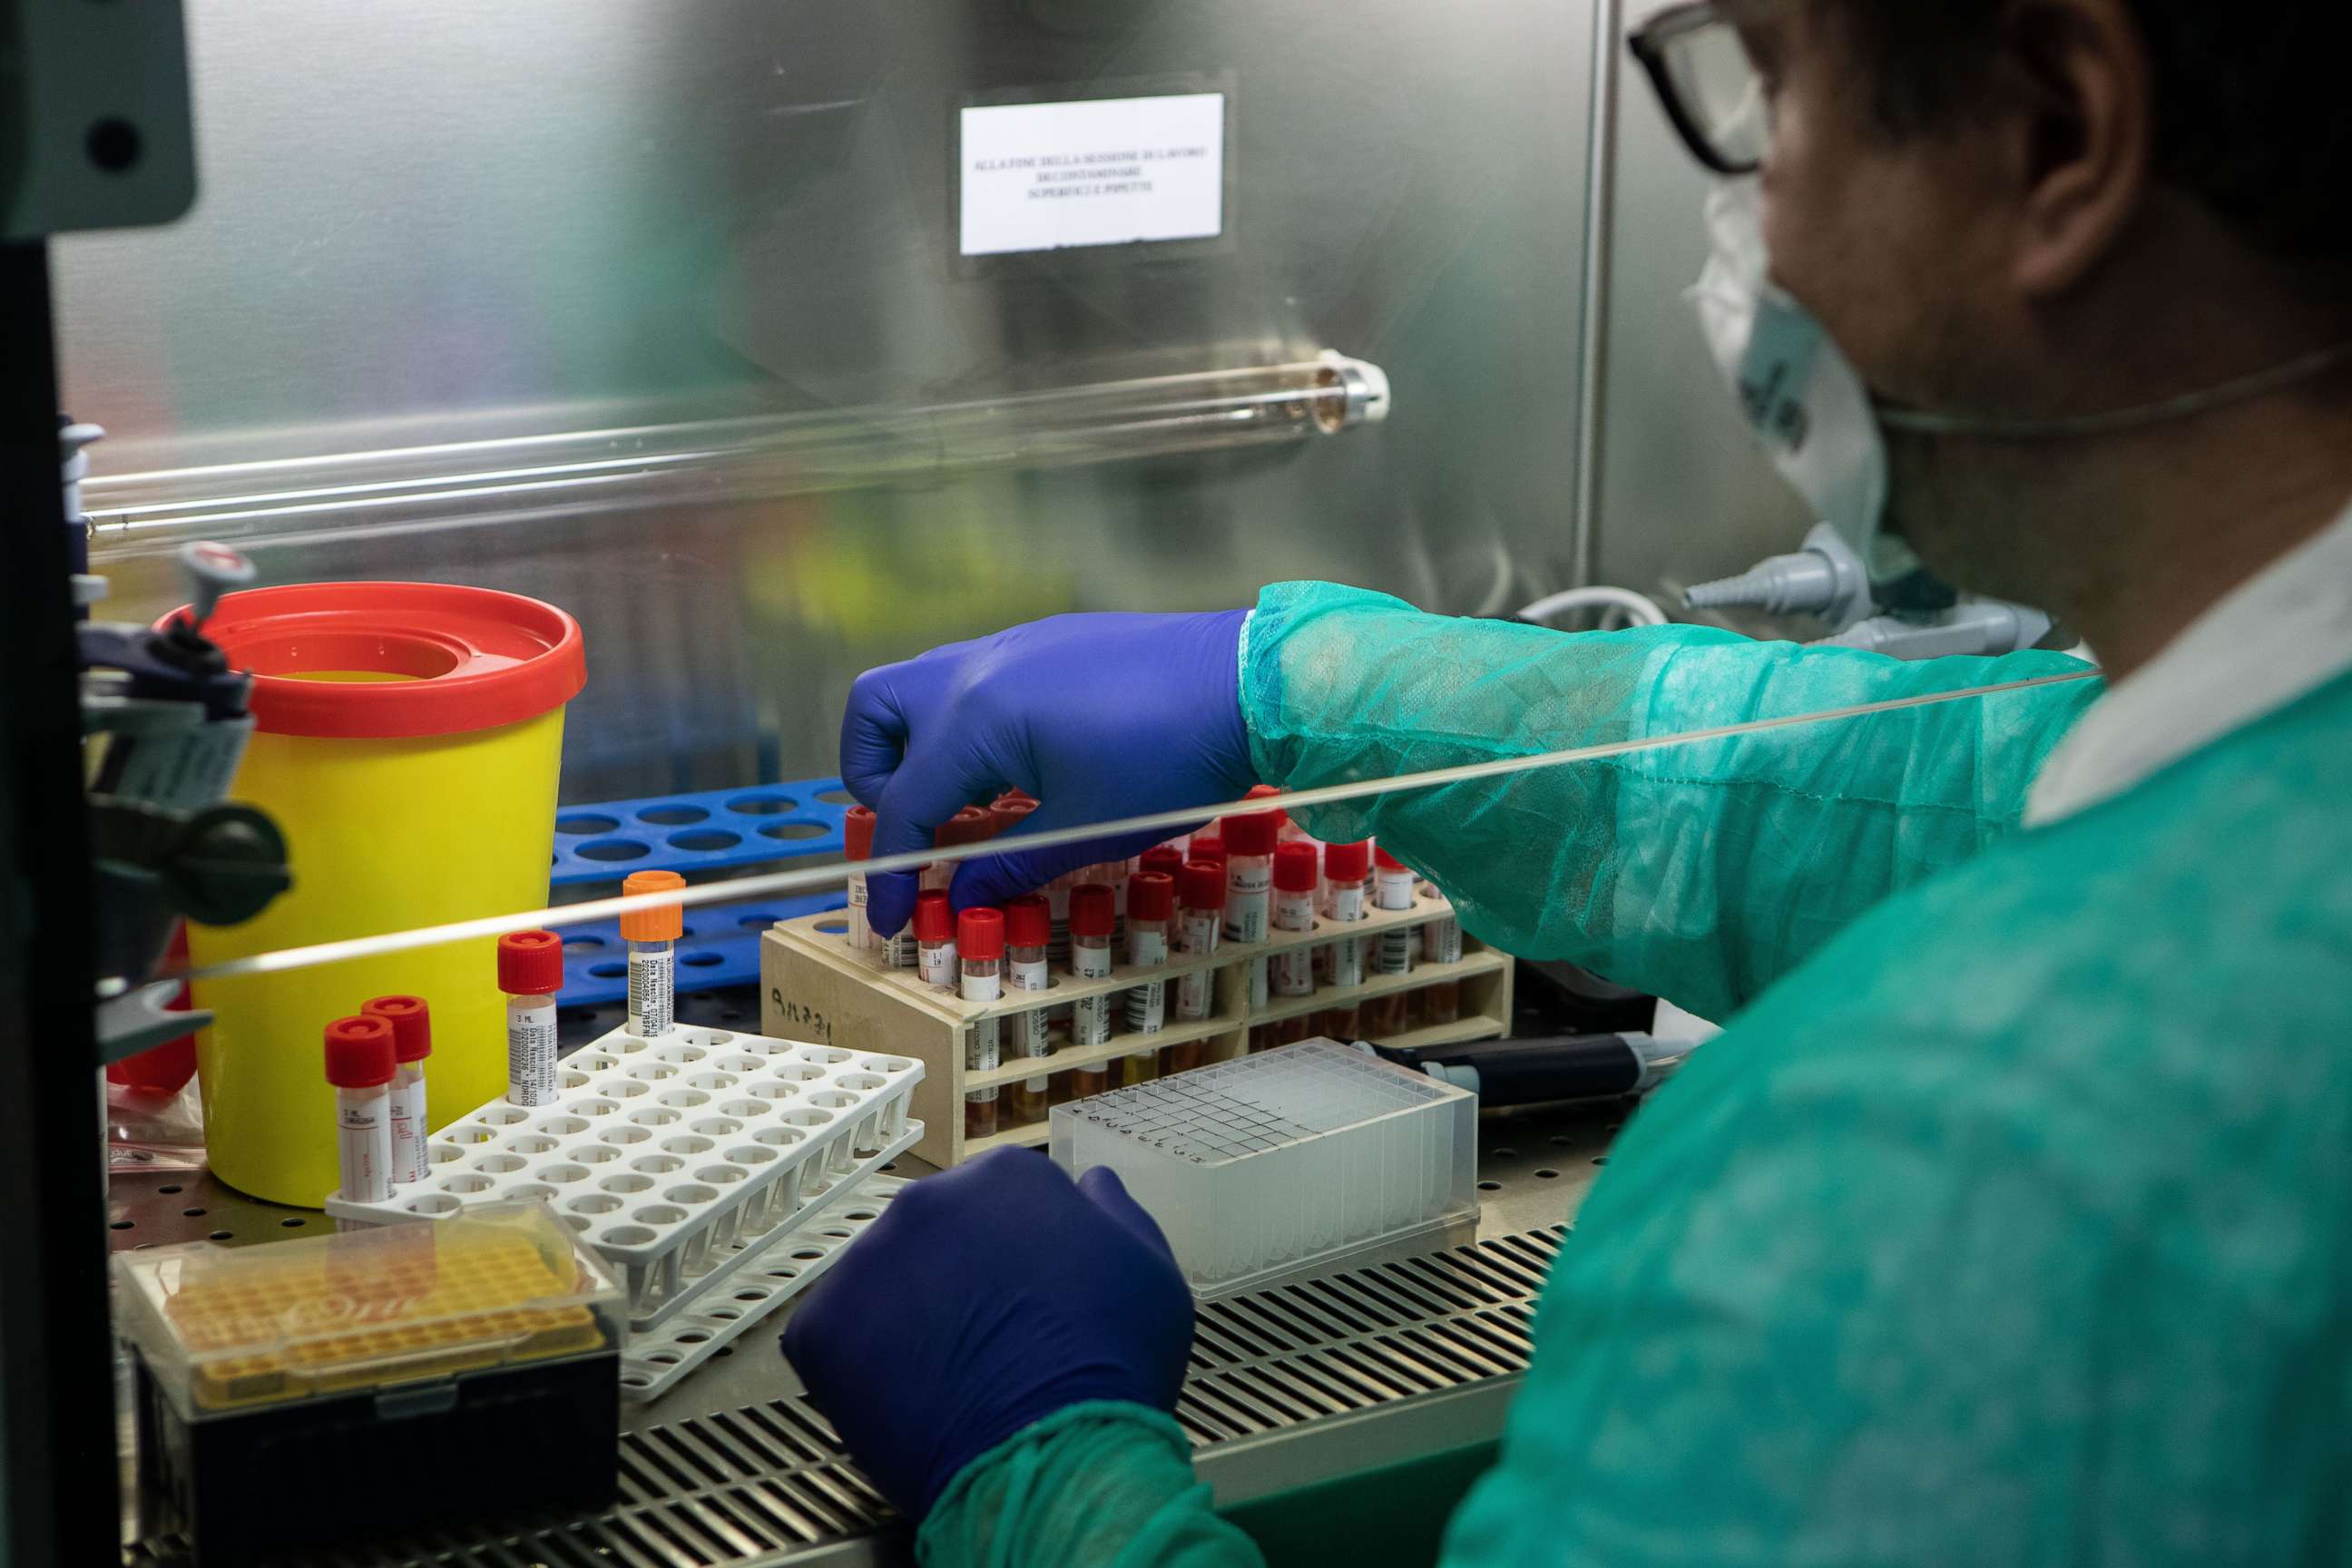 PHOTO: A lab worker tries to isolate the presence of Coronavirus during a swab test process in the Molecular biology laboratory of the Ospedale Niguarda, on March 05, 2020 in Milan, Italy. ages)